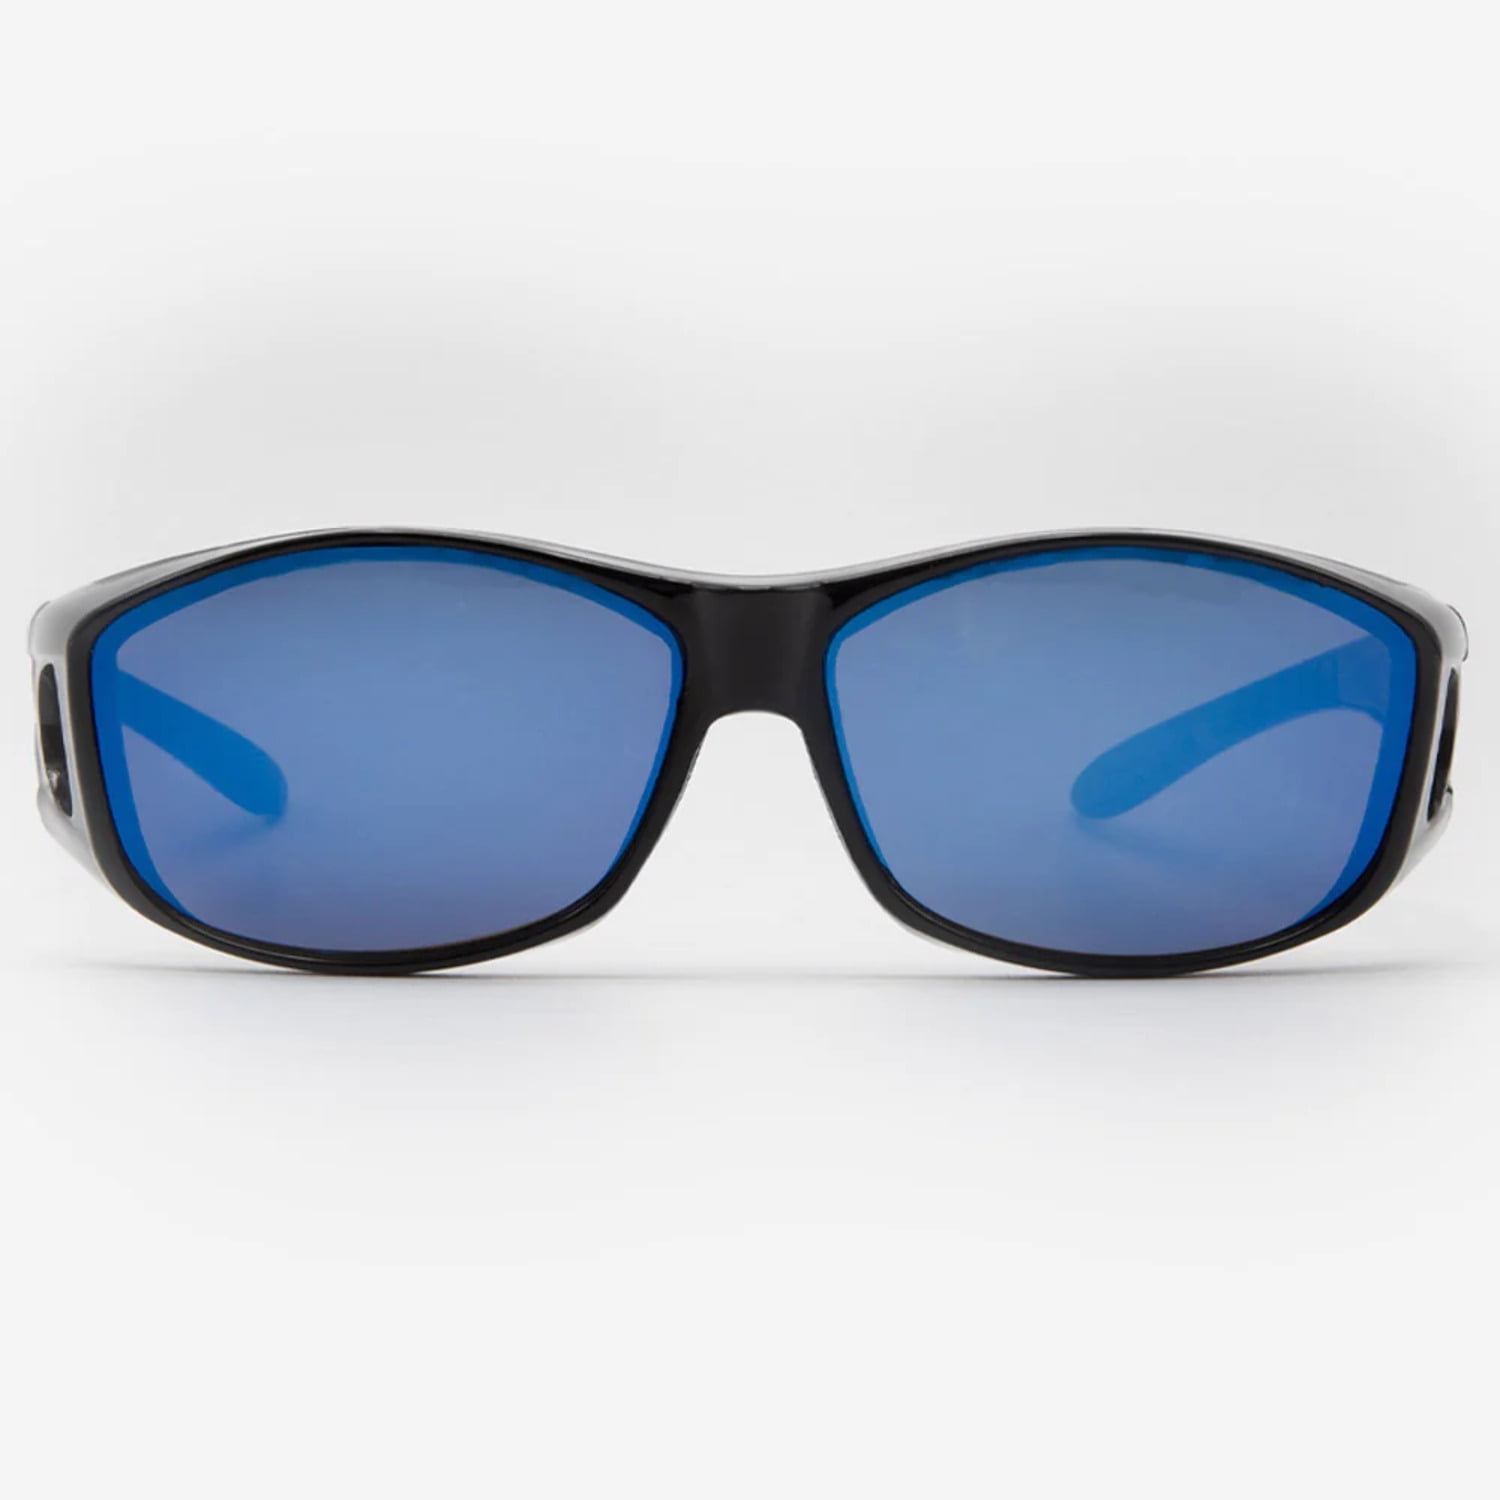 Largest Wrap Around Color Mirror Fit Over Sunglasses Style, 40% OFF